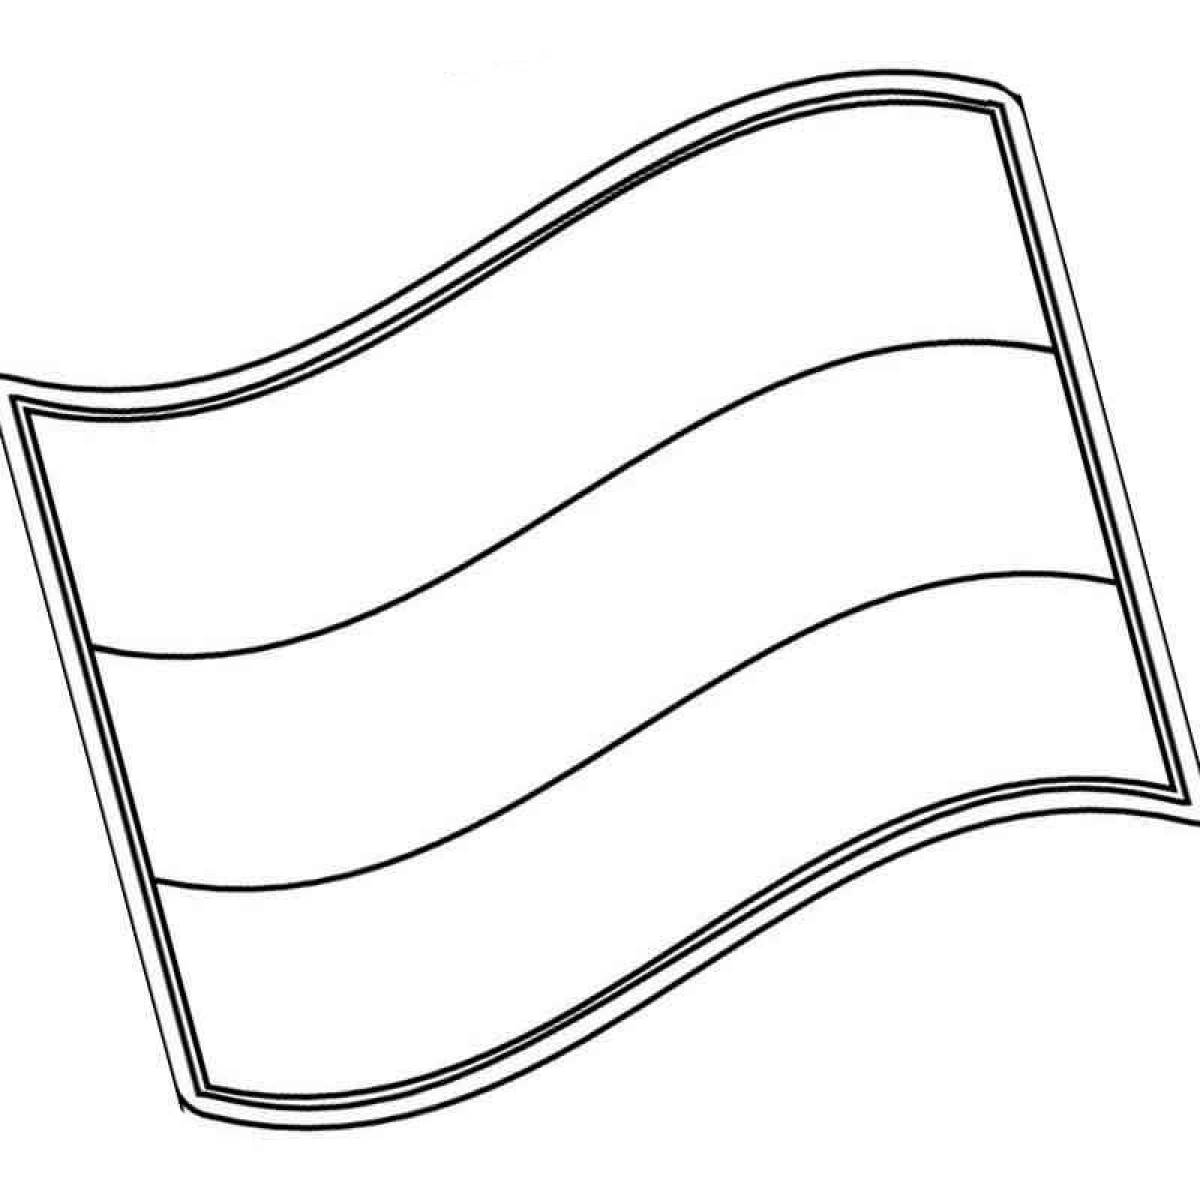 Bold Russian flag coloring page